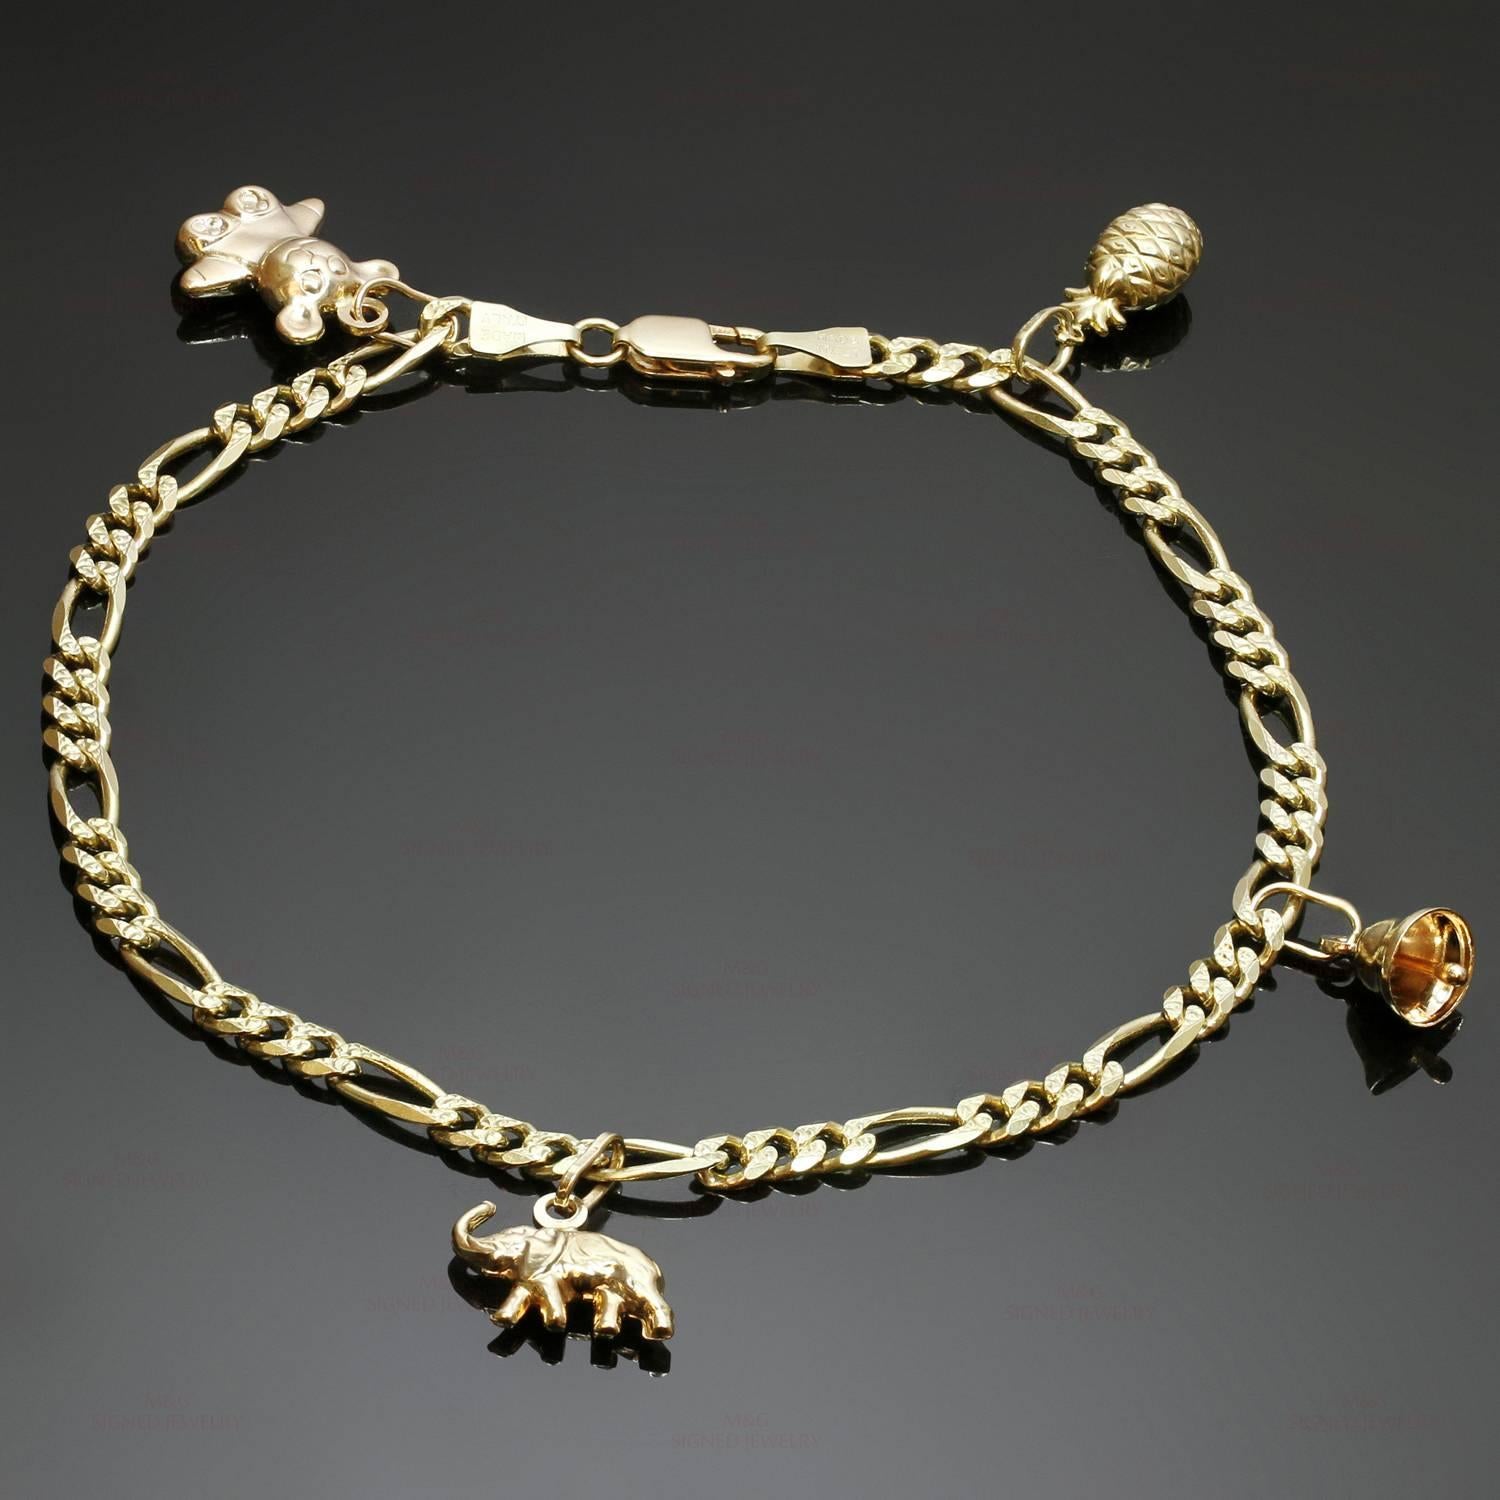 This ankle bracelet is crafted in 14k yellow gold and features 4 charms - an elephant, a pineapple, a teddy bear, and a jingle bell. Made in Italy circa 1990s. Measurements: 0.15" (4mm) width, 10" (25.4cm) length. 